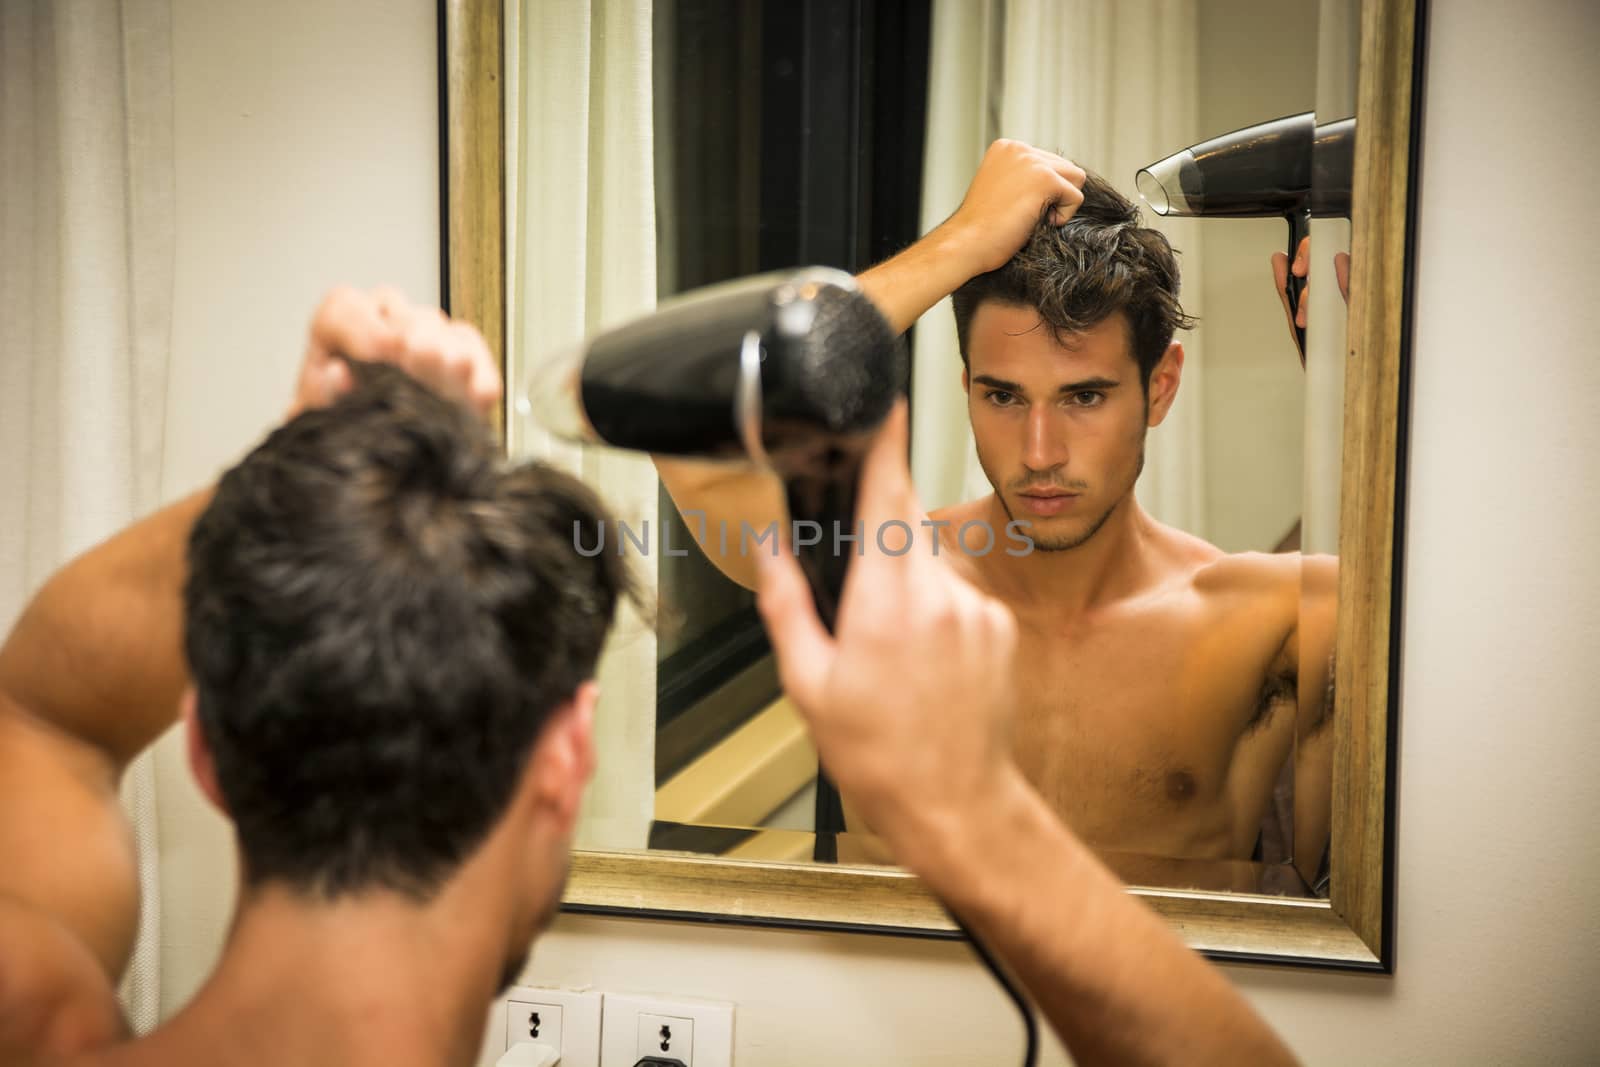 Shirtless young man drying hair with hairdryer by artofphoto